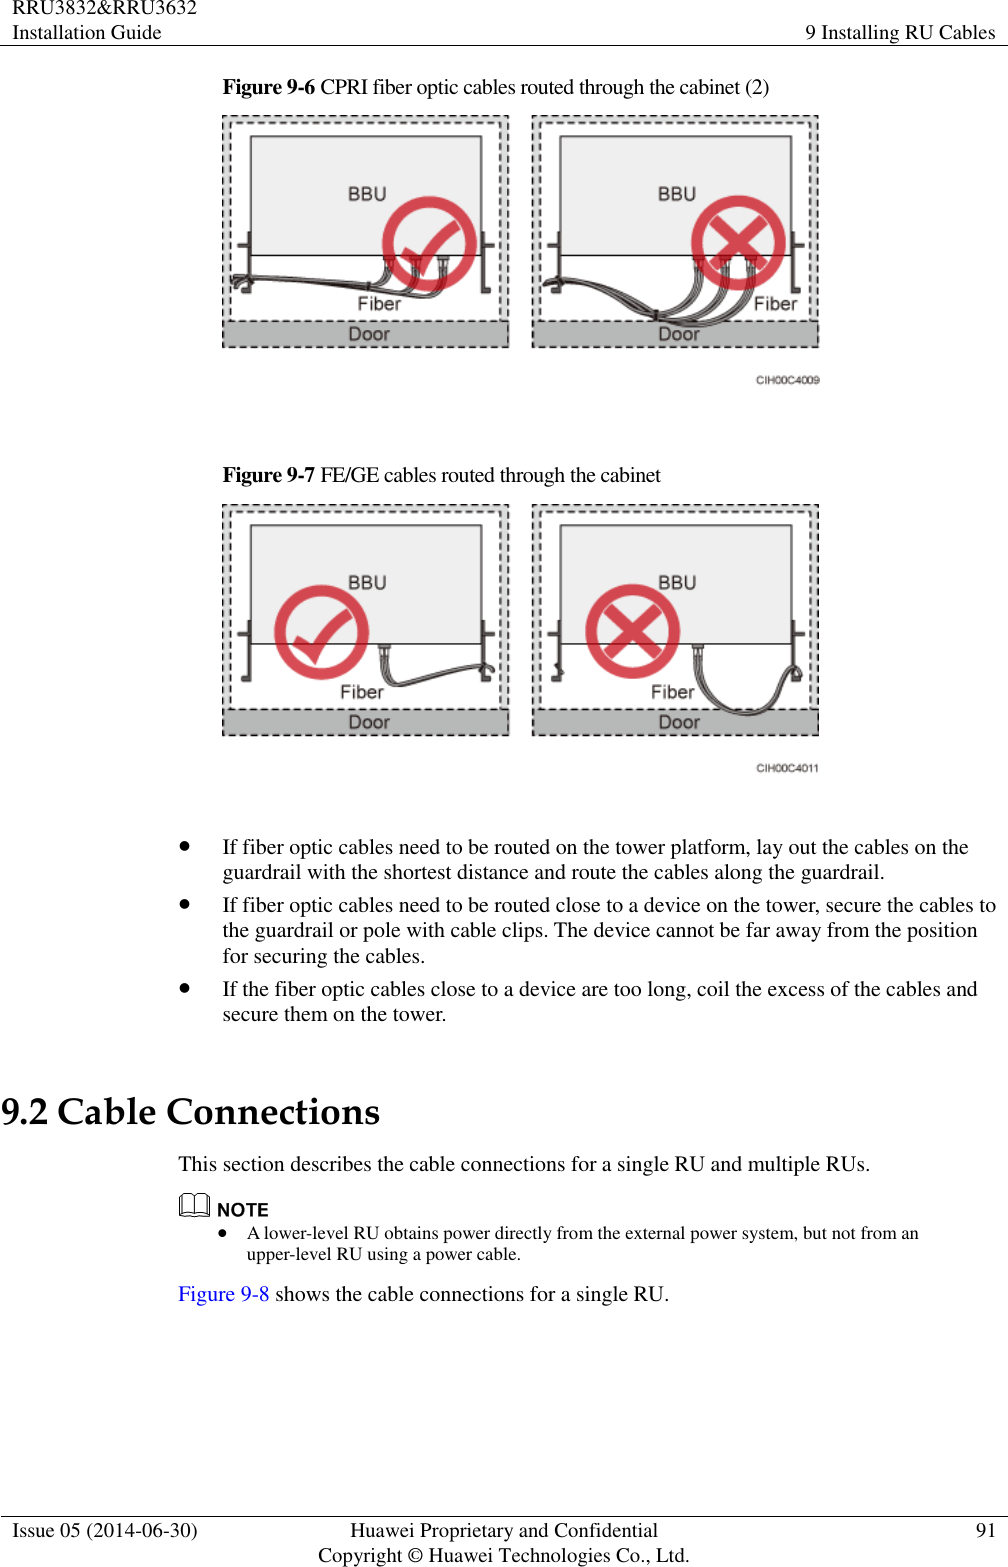 RRU3832&amp;RRU3632 Installation Guide 9 Installing RU Cables  Issue 05 (2014-06-30) Huawei Proprietary and Confidential                                     Copyright © Huawei Technologies Co., Ltd. 91  Figure 9-6 CPRI fiber optic cables routed through the cabinet (2)   Figure 9-7 FE/GE cables routed through the cabinet    If fiber optic cables need to be routed on the tower platform, lay out the cables on the guardrail with the shortest distance and route the cables along the guardrail.  If fiber optic cables need to be routed close to a device on the tower, secure the cables to the guardrail or pole with cable clips. The device cannot be far away from the position for securing the cables.  If the fiber optic cables close to a device are too long, coil the excess of the cables and secure them on the tower. 9.2 Cable Connections This section describes the cable connections for a single RU and multiple RUs.   A lower-level RU obtains power directly from the external power system, but not from an upper-level RU using a power cable. Figure 9-8 shows the cable connections for a single RU. 